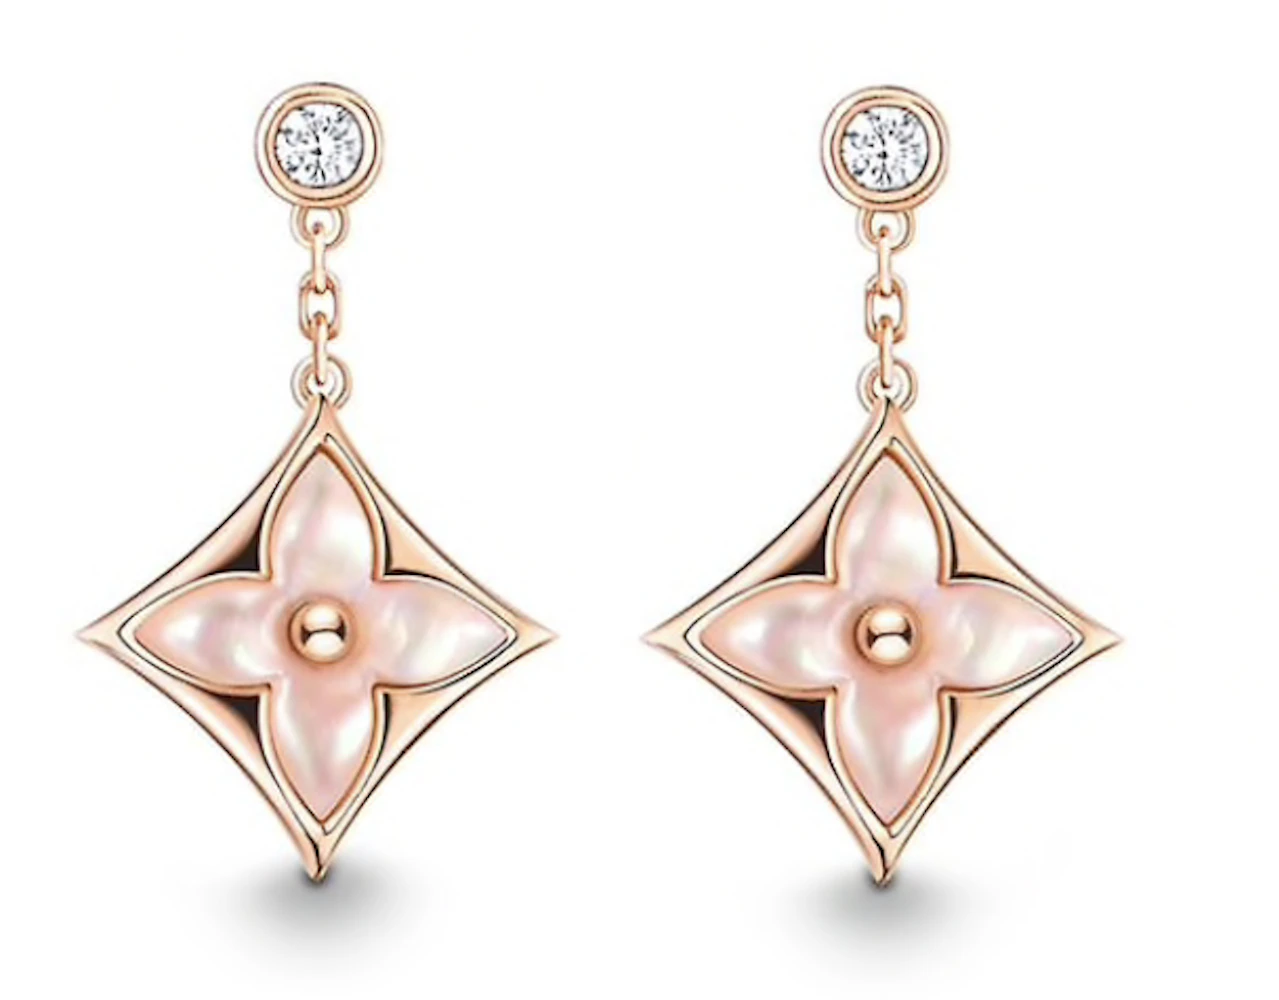 Louis Vuitton Color Blossom Earrings, Pink Gold, White Gold, Pink Opal and Diamonds. Size NSA